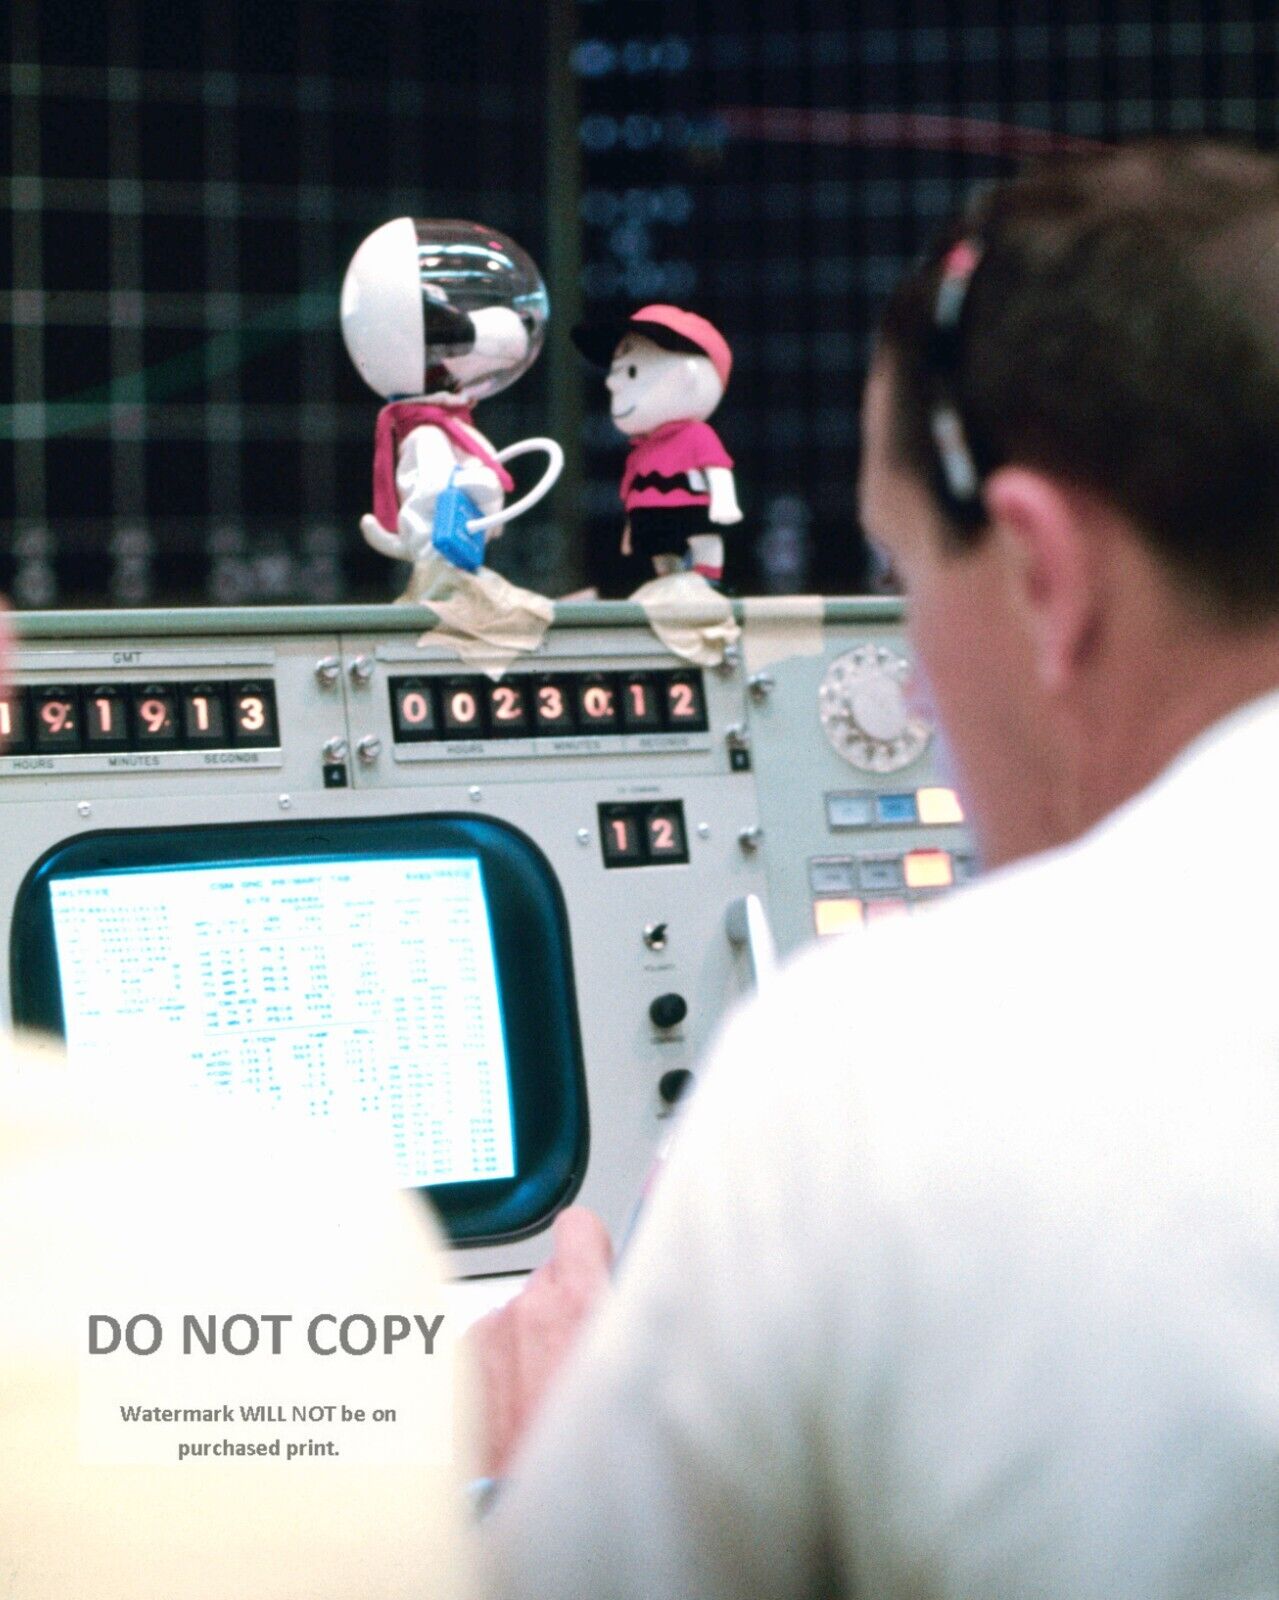 SNOOPY AND CHARLIE BROWN IN MISSION CONTROL FOR APOLLO 10 - 8X10 PHOTO (ZZ-690)